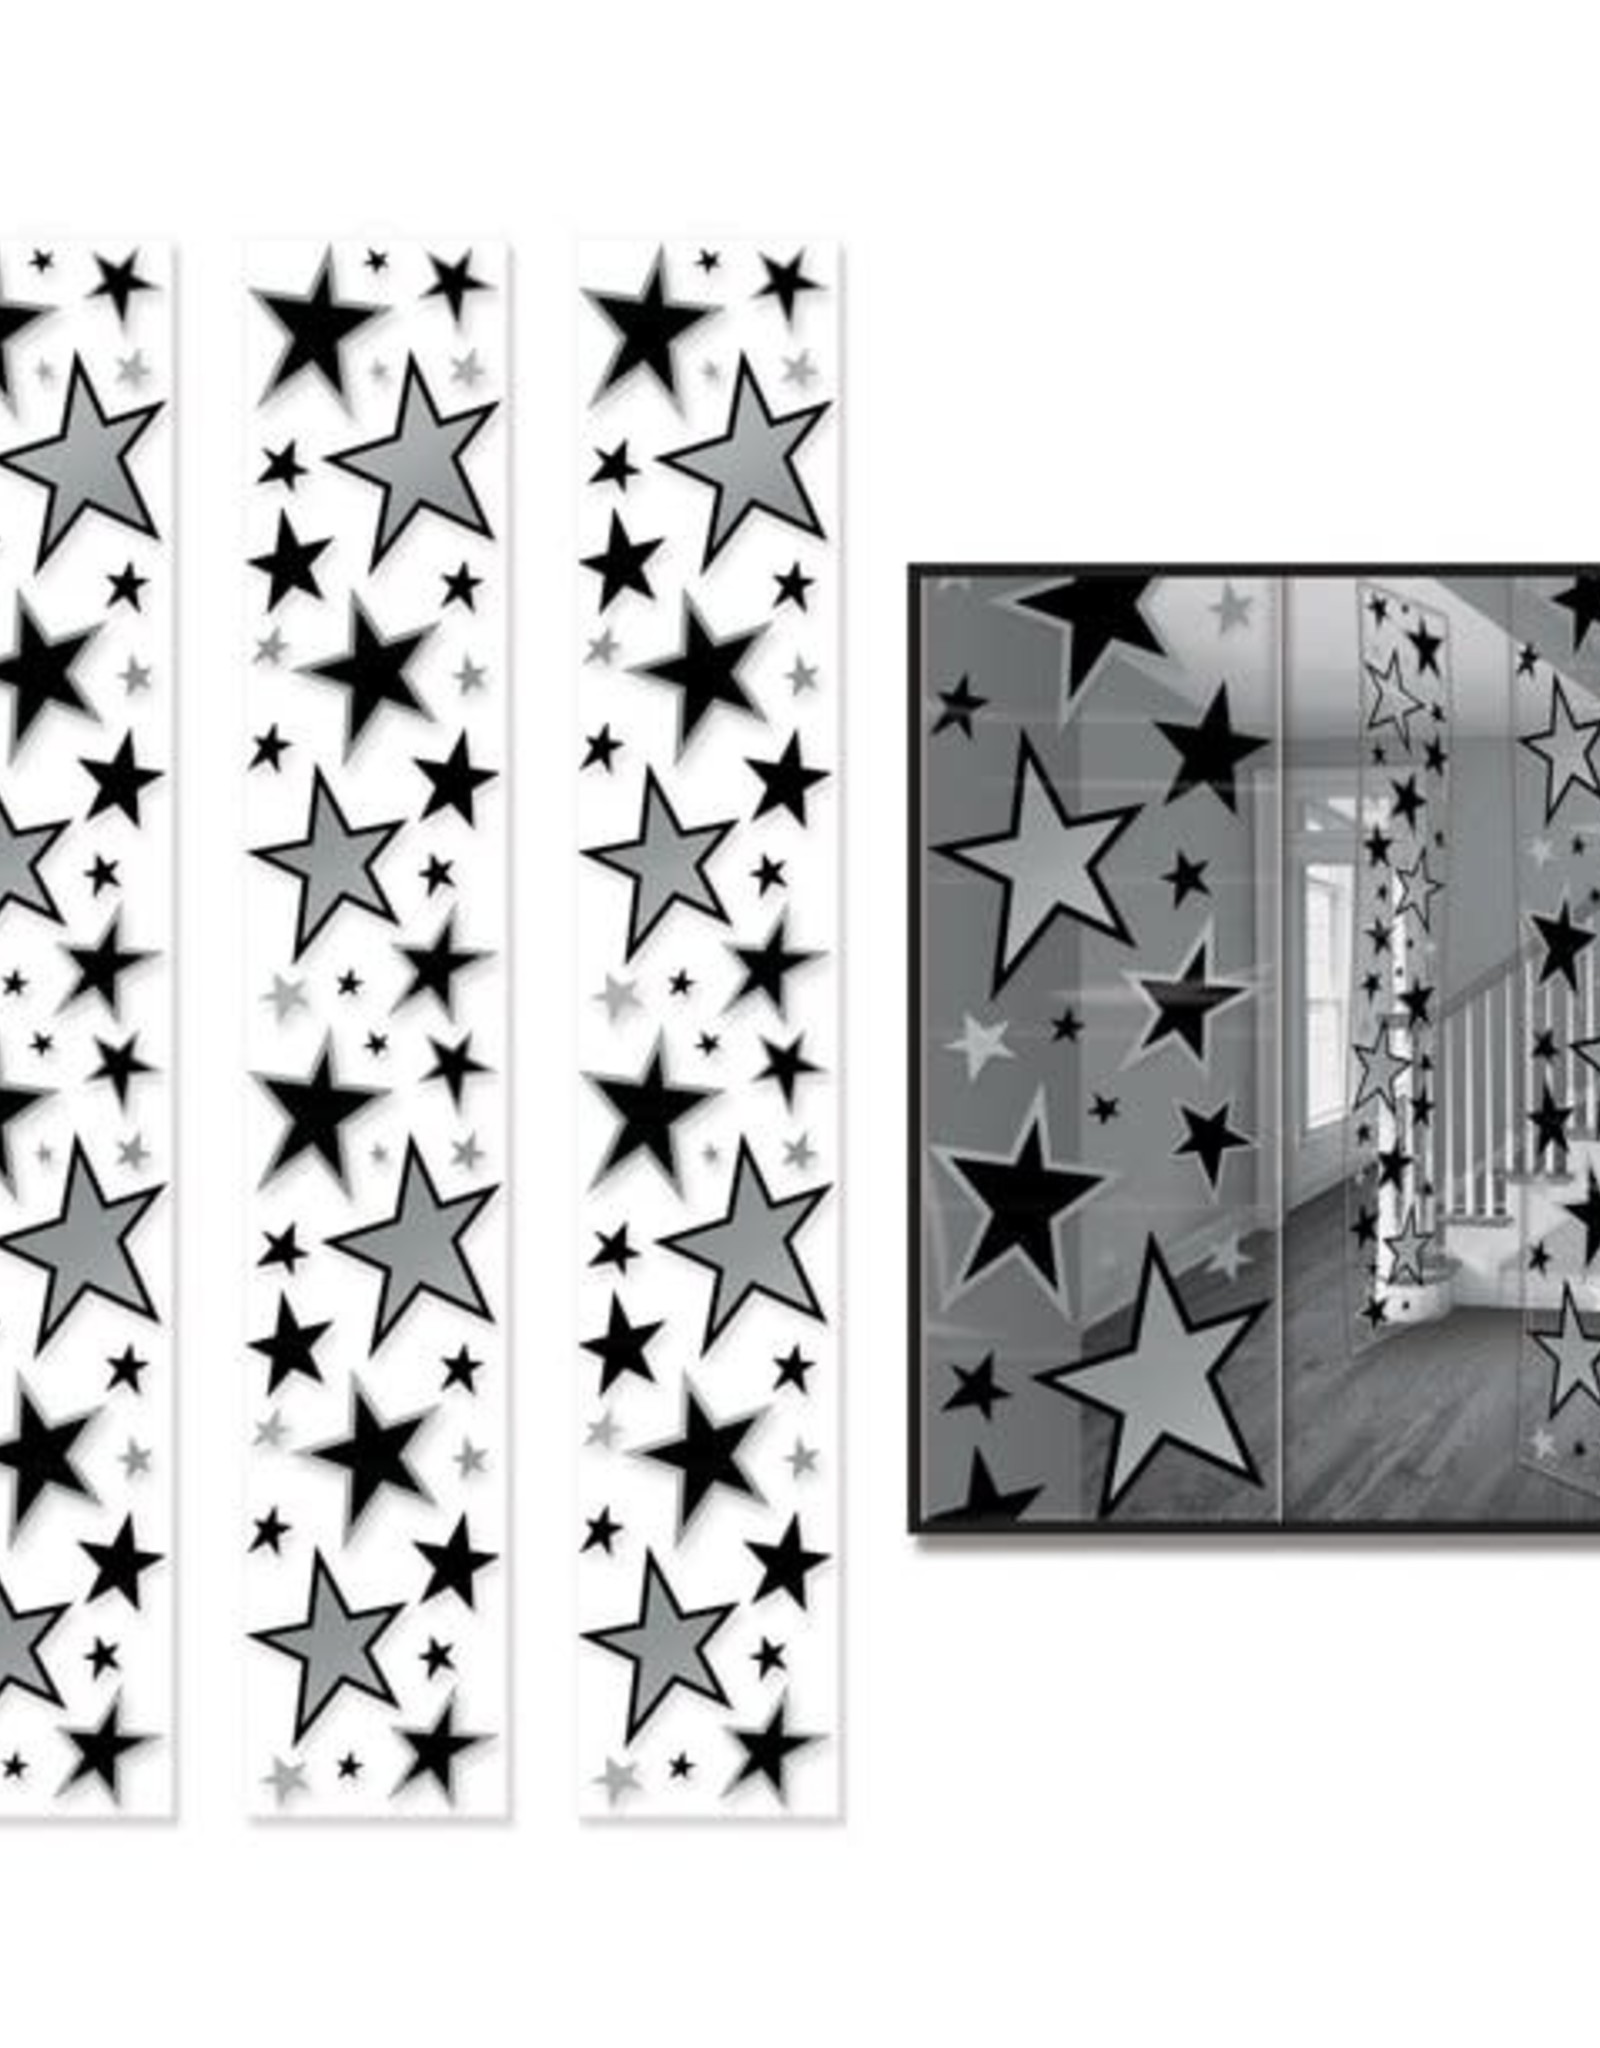 Black and Silver Star Party Panel Decorations 6ft